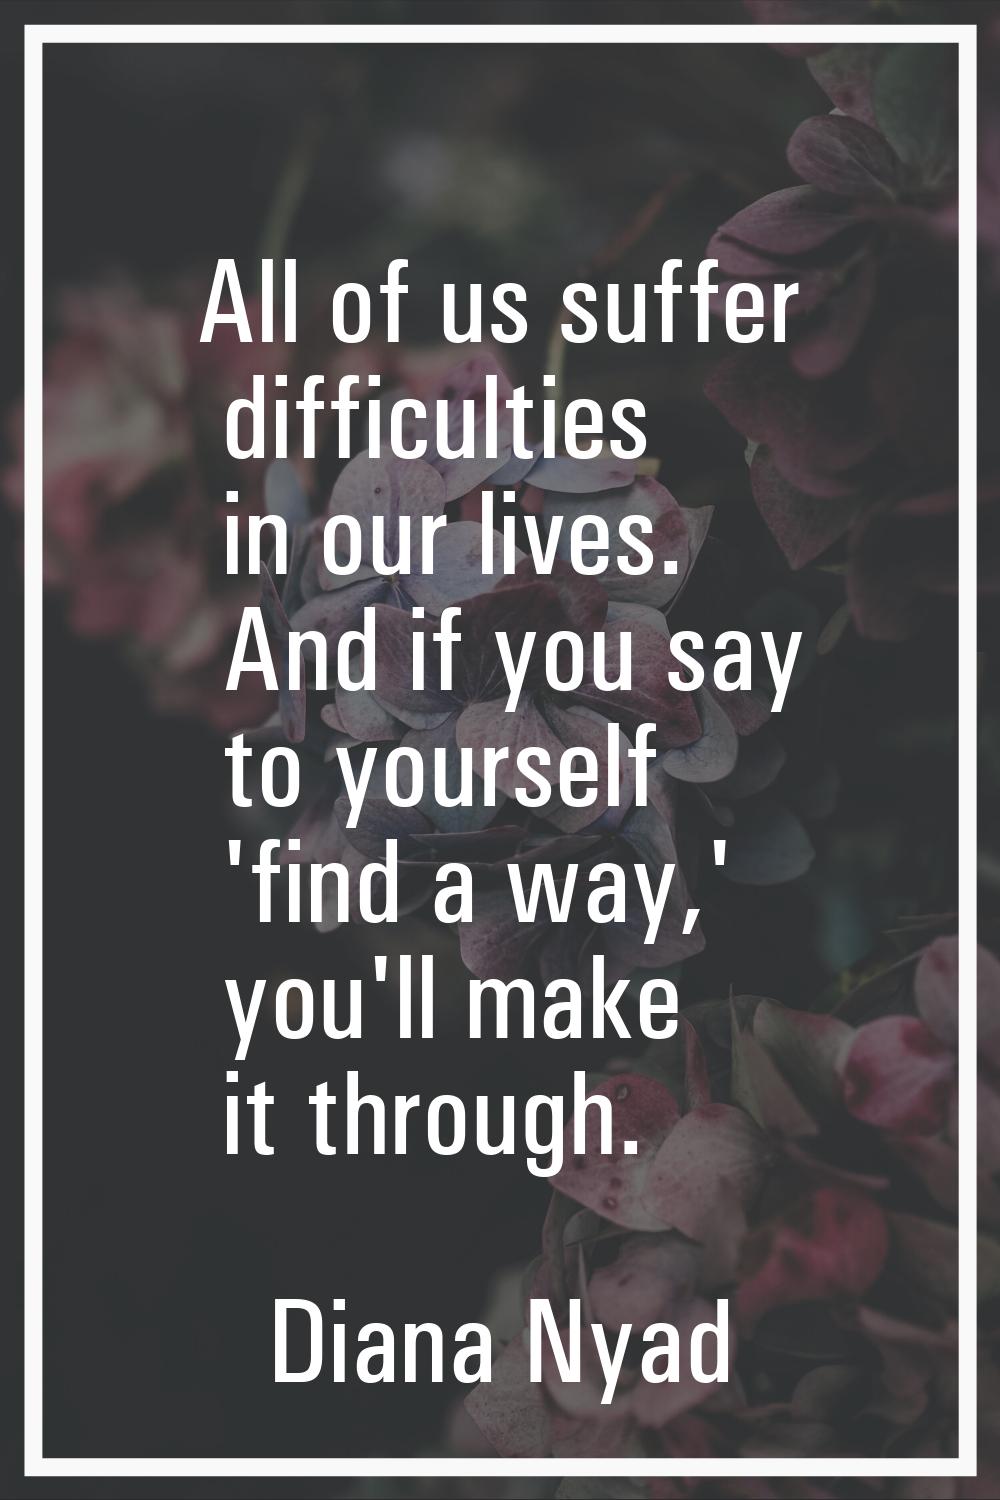 All of us suffer difficulties in our lives. And if you say to yourself 'find a way,' you'll make it